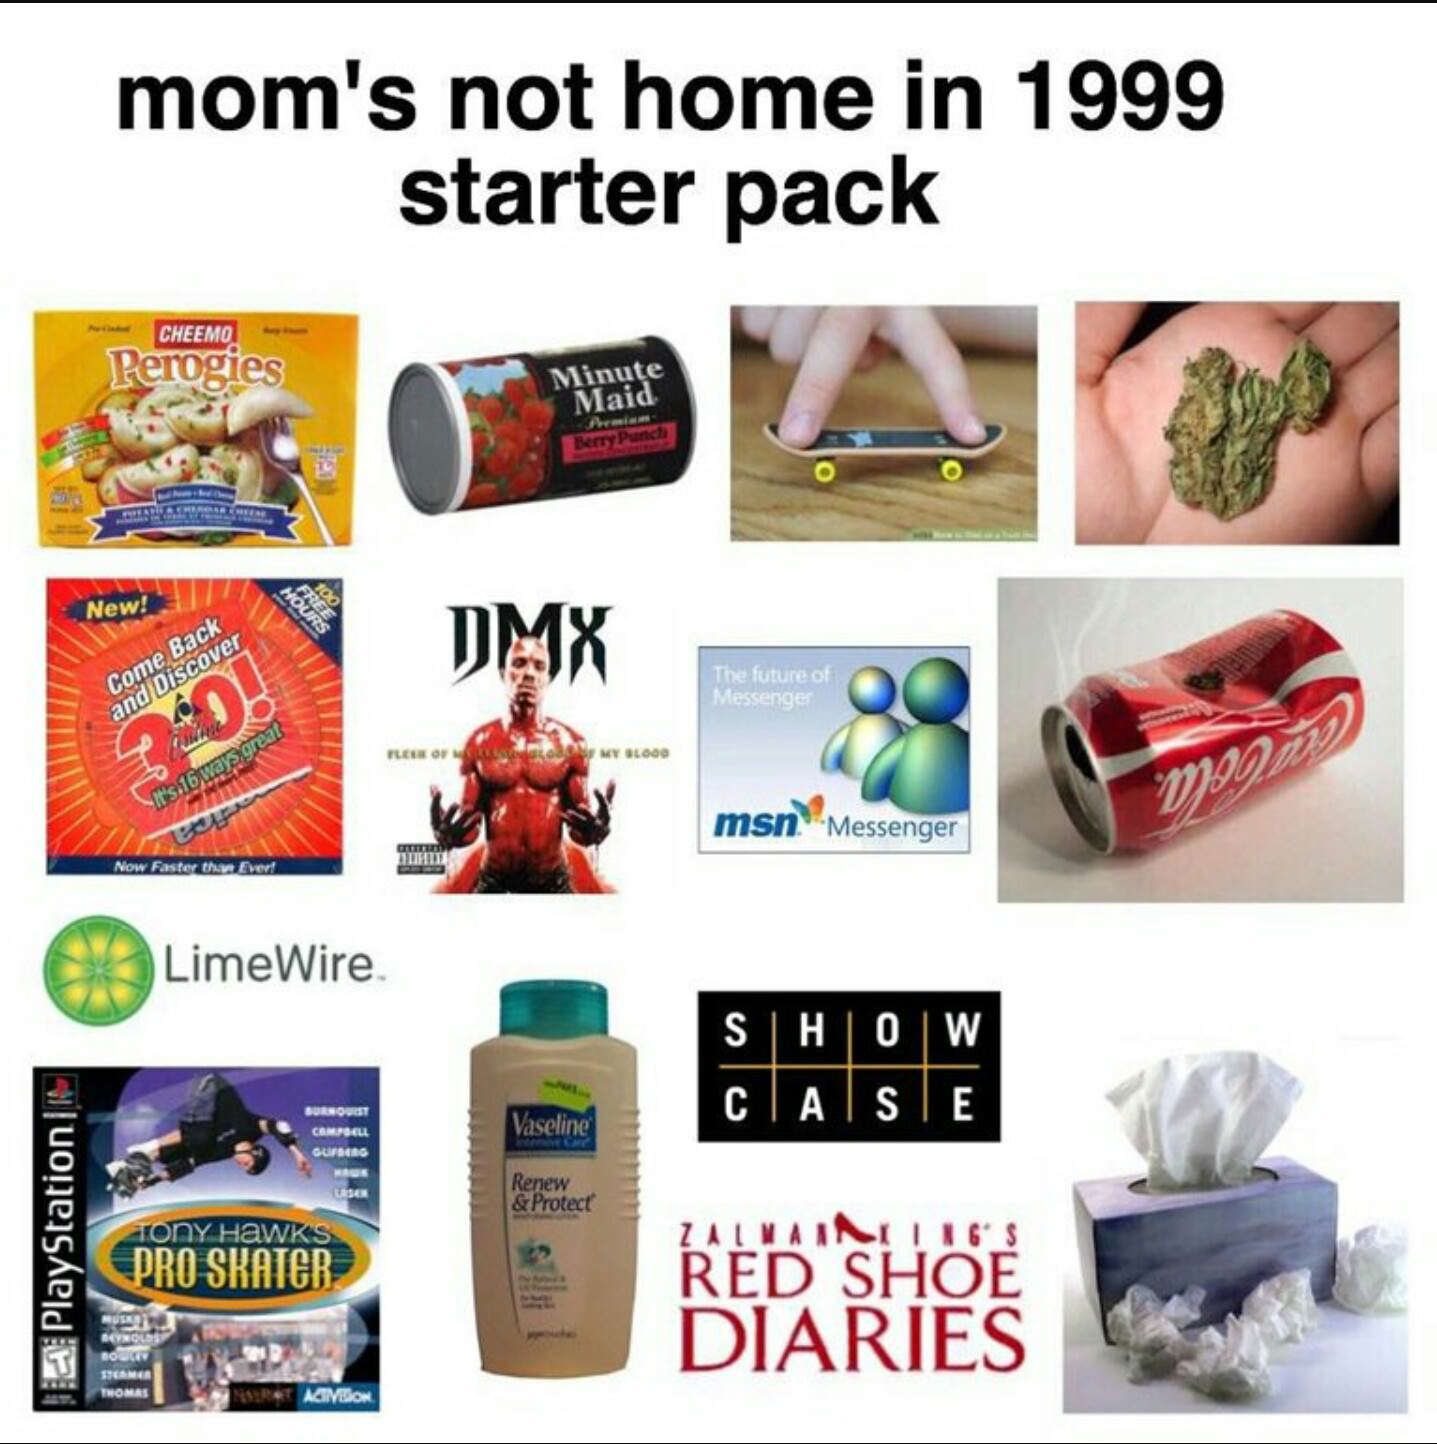 starter pack - twitter starter packs - mom's not home in 1999 mom's not home in 1999 starter pack Cheemo Perogies Minute Maid Bemy Punch New! Come Back and Discover The future of Messenger Fleet Of My Blood It's 16 ways great msn Messenger Ctttttt Now Fas